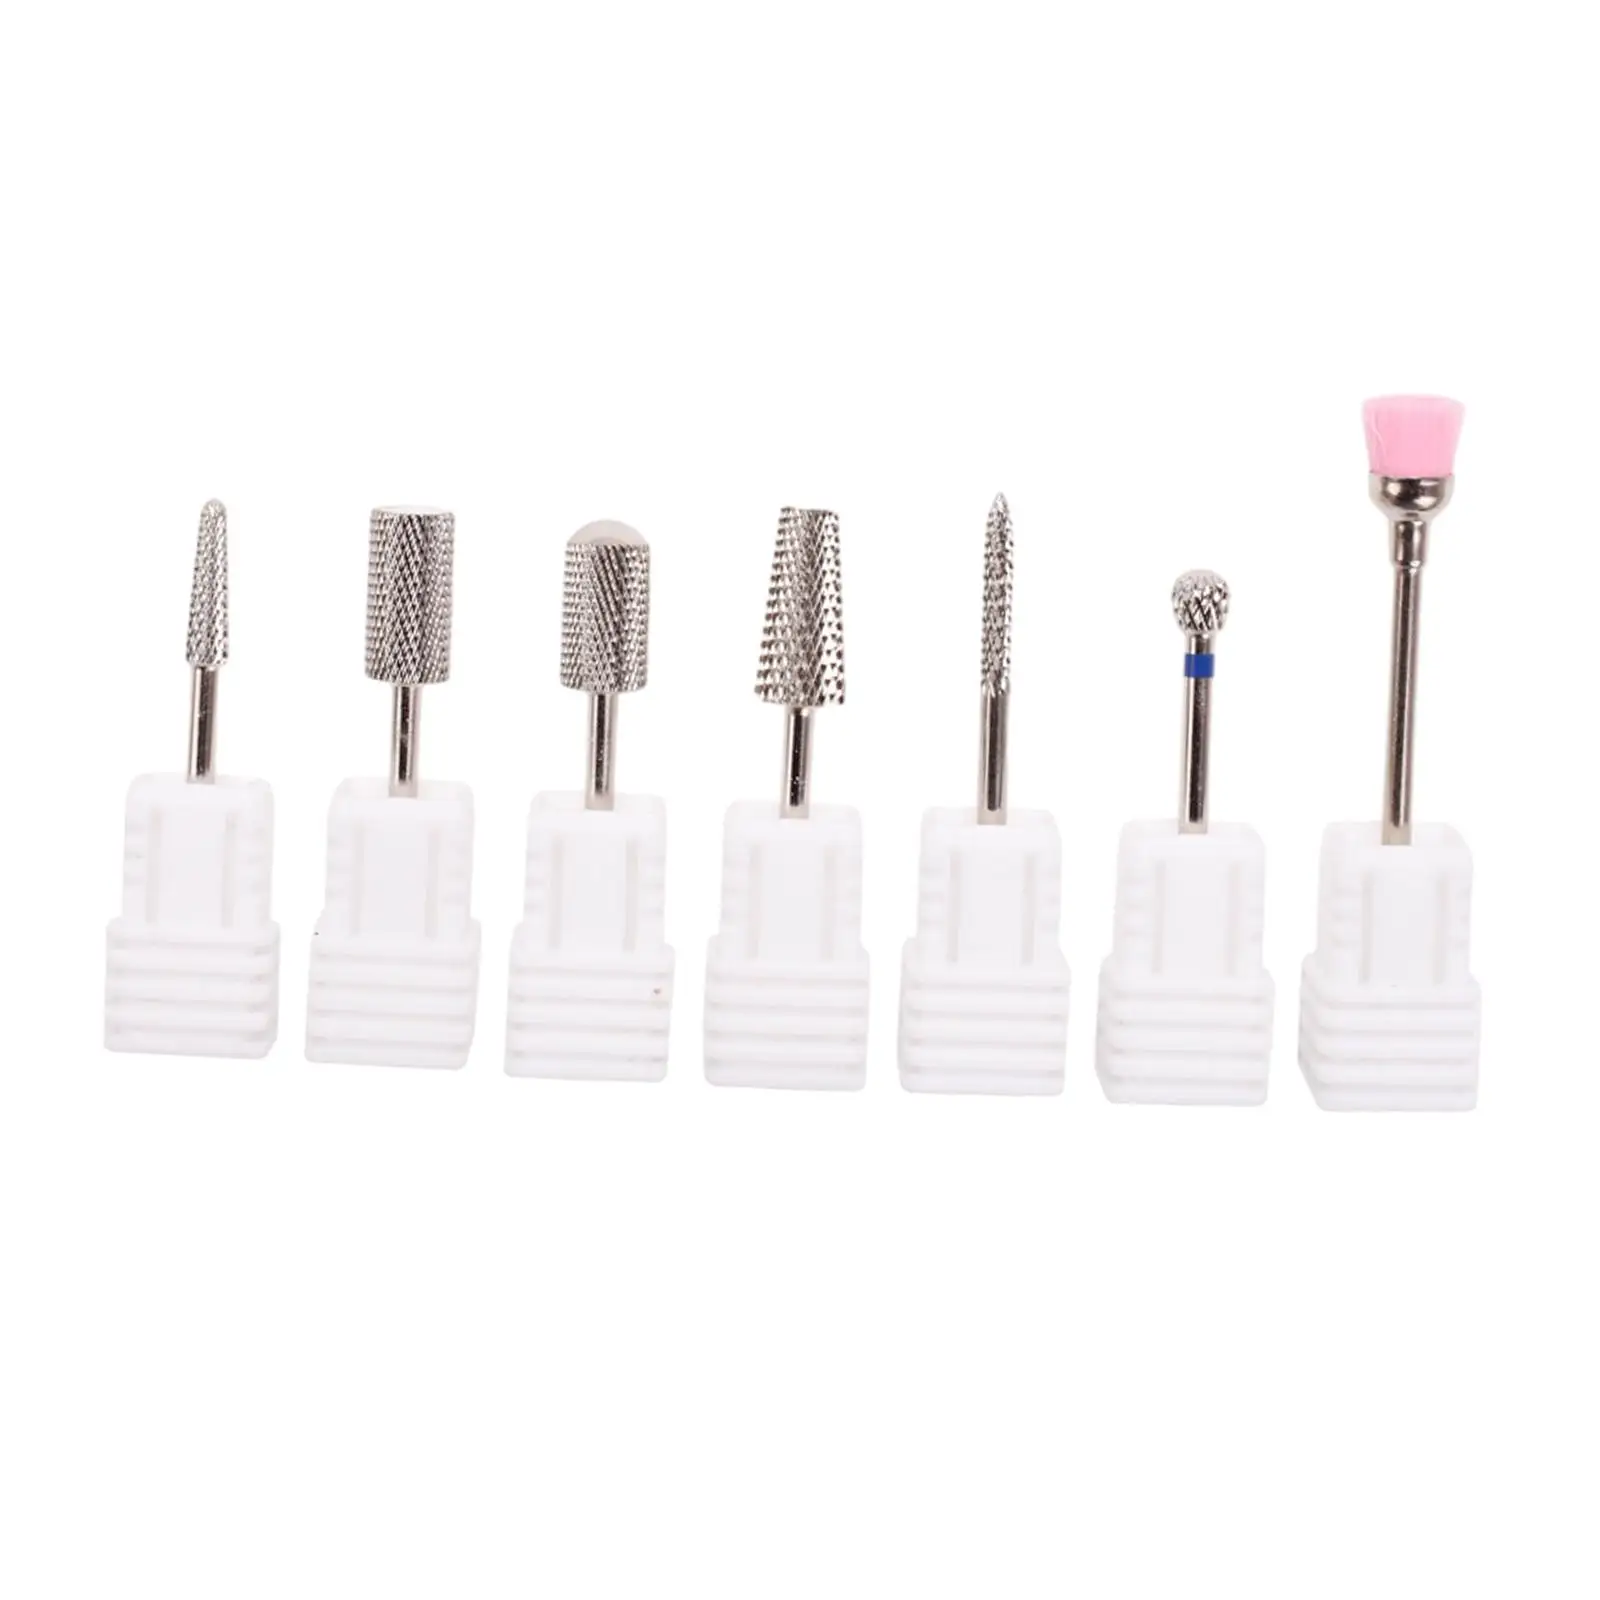 

7x Manicure Bits Home Salon Use Cuticle Remove Electric Manicure Head Replacement Device Nail Art Polishing Grinding Heads